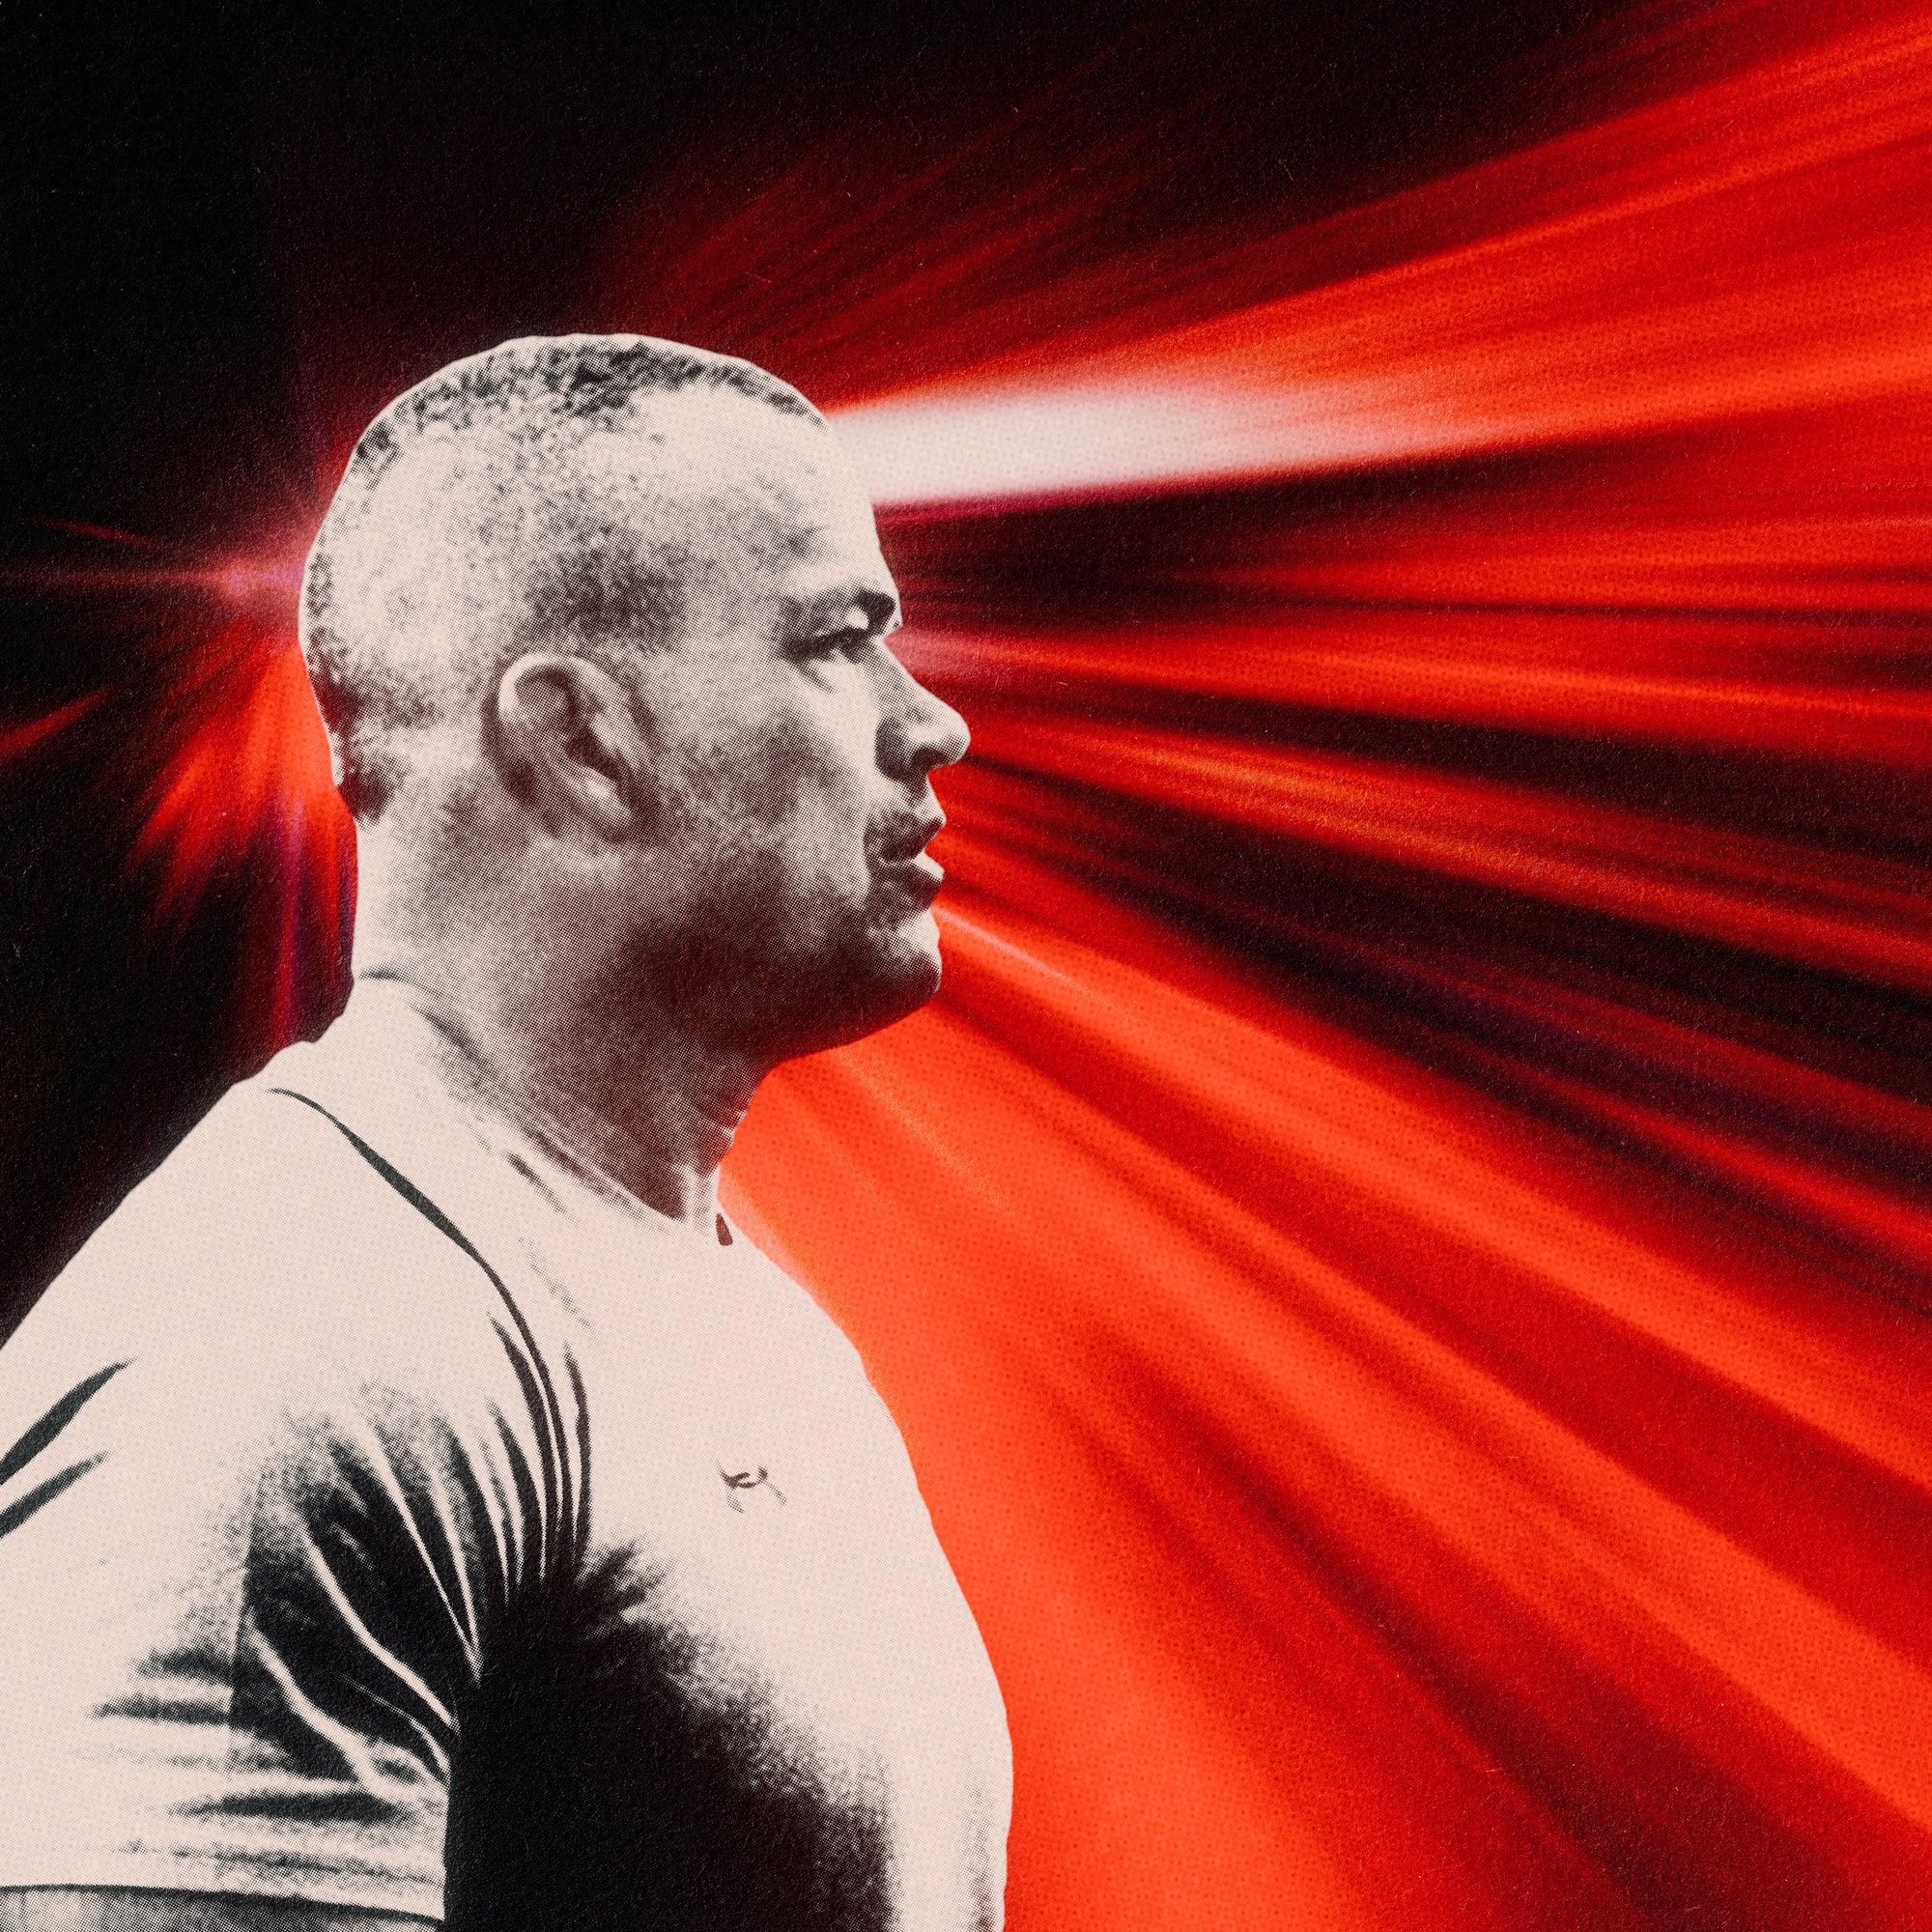 JUST GO DO IT ft Jocko Willink | Single | This Week In Meaningwave August 11 2022